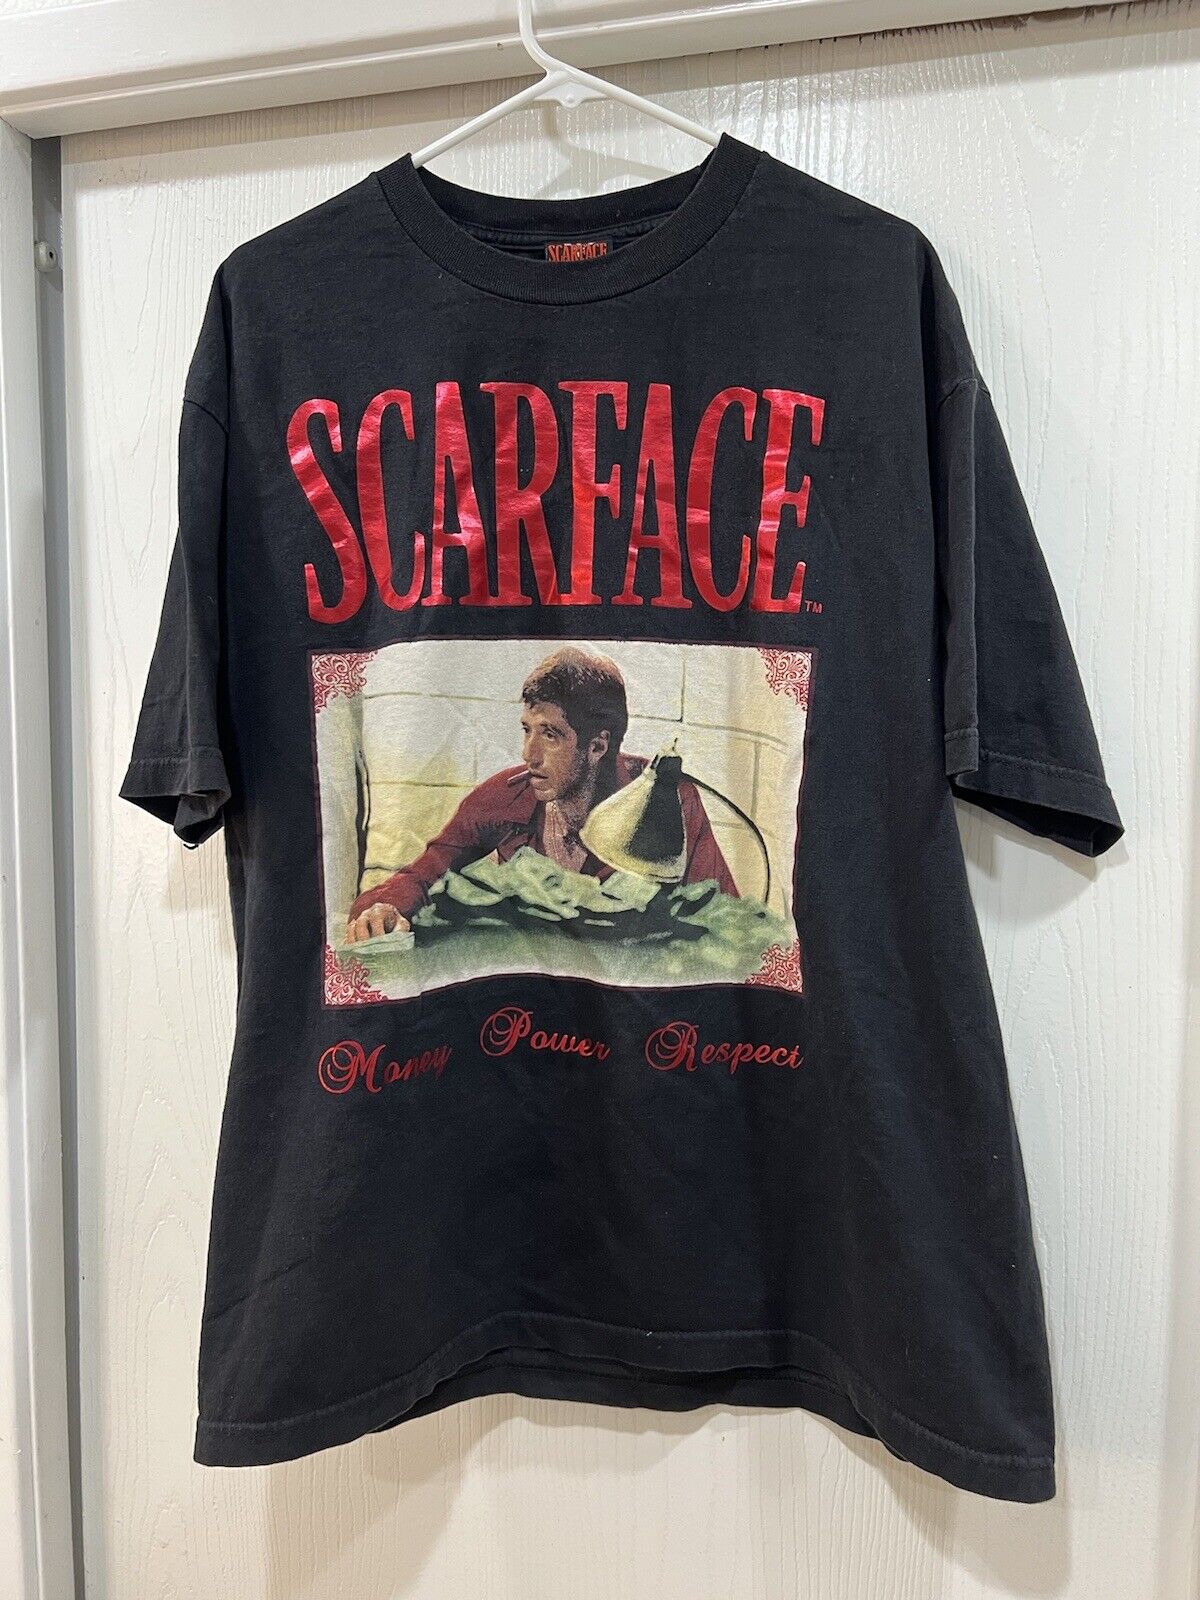 Vintage Official Scarface T-Shirt Dragonfly Universal Studios Movie Promo